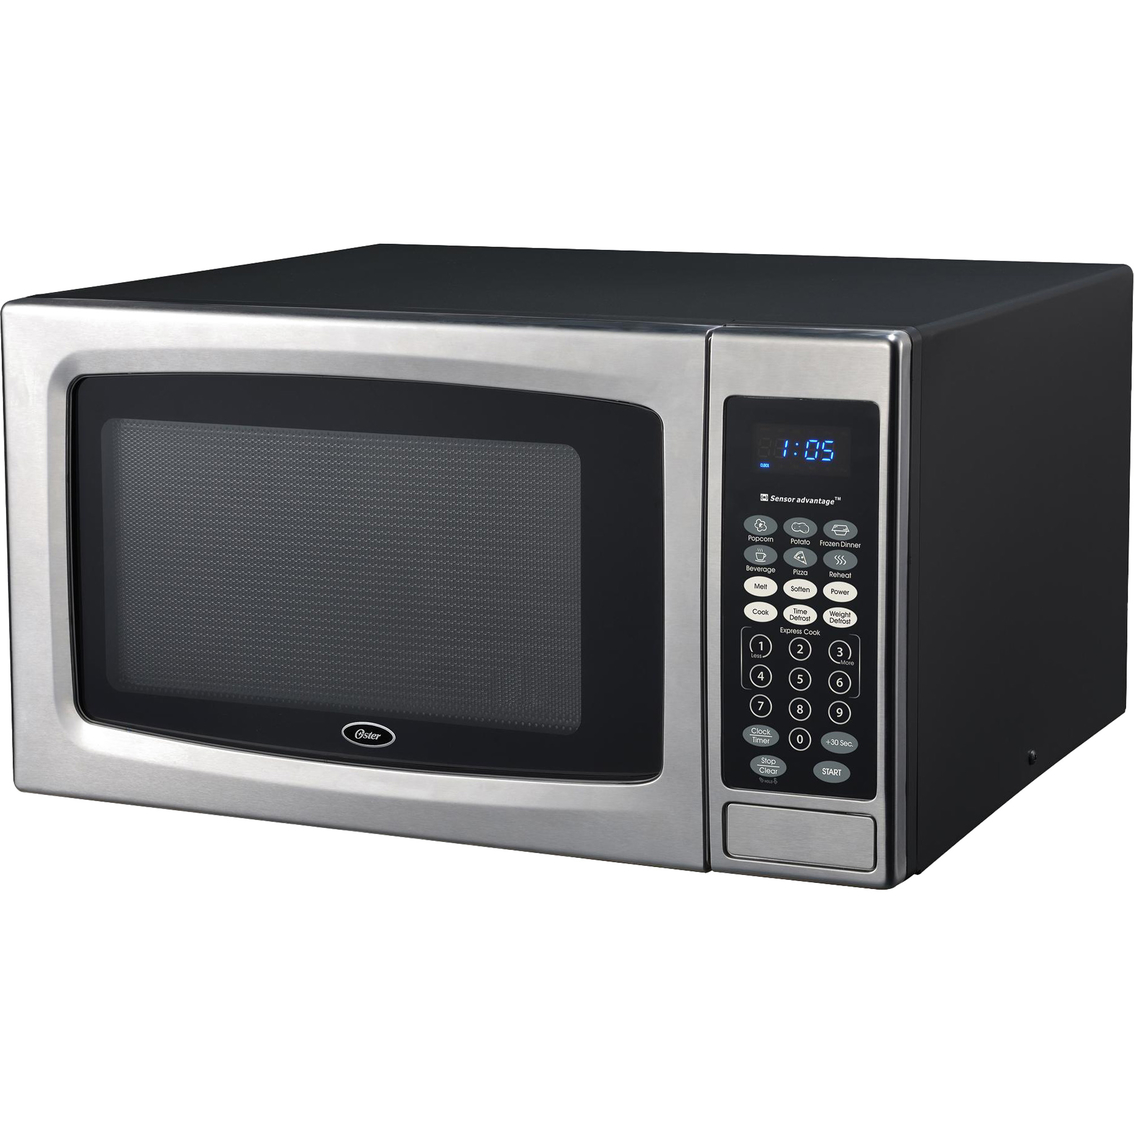 Oster 1.3 Cu. Ft. 1100 Watt Microwave Oven With Sensor | Microwave